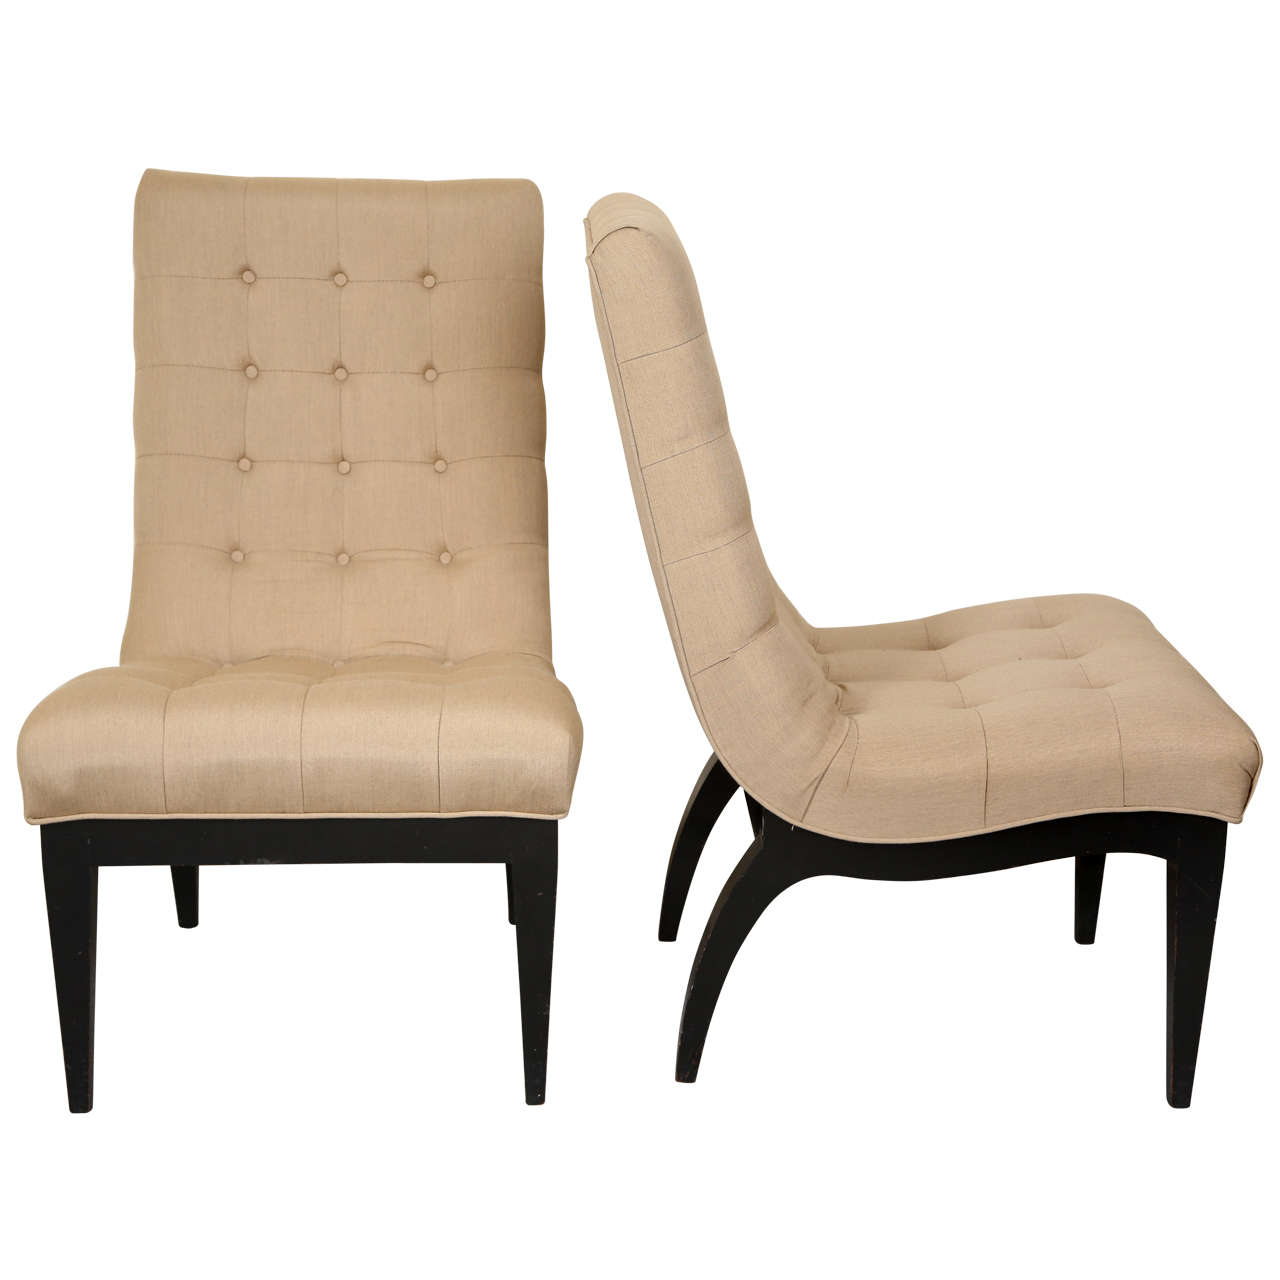 Pair of Slipper Chairs by James Mont